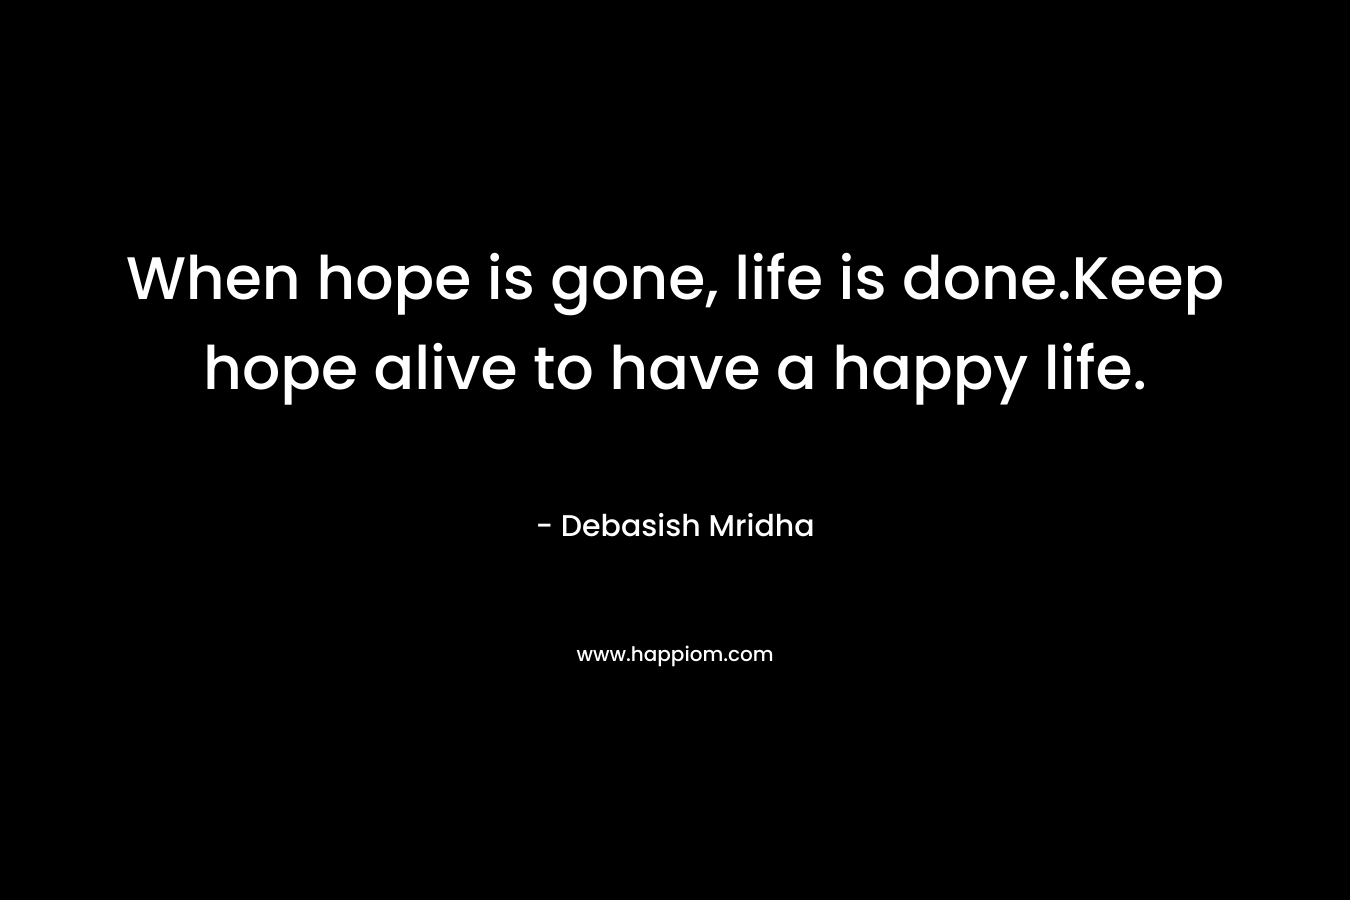 When hope is gone, life is done.Keep hope alive to have a happy life.